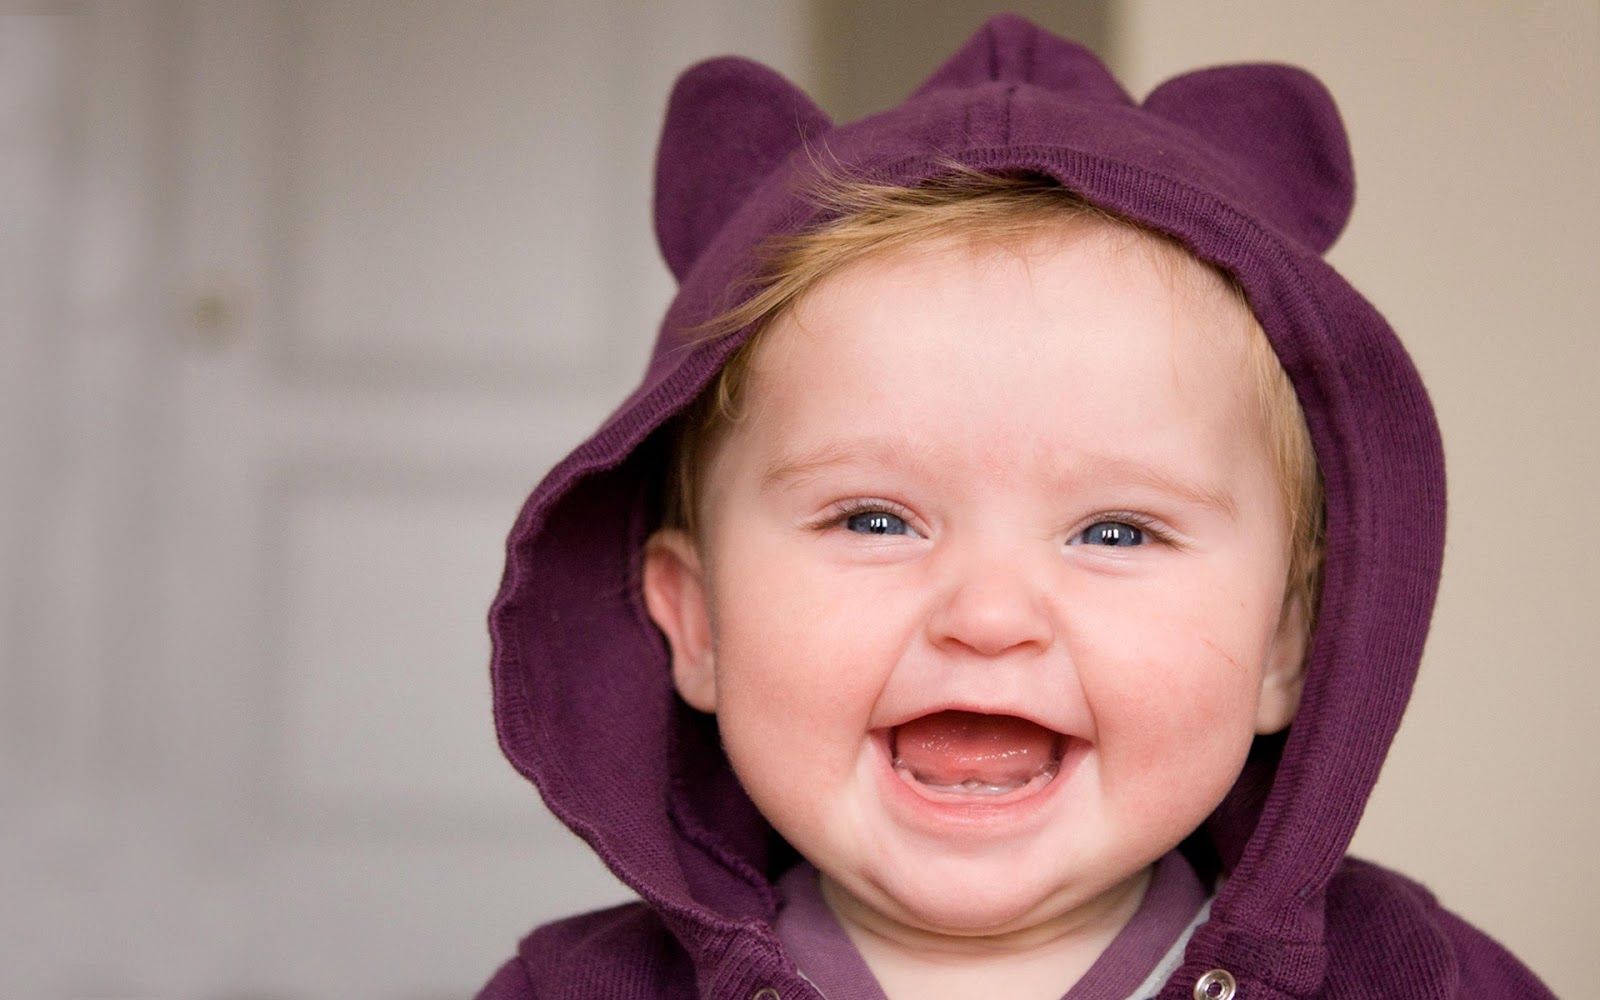 Free download laughing baby HD wallpaper sweet baby girl wallpaper baby on [1600x1000] for your Desktop, Mobile & Tablet. Explore Babies Photo Wallpaper. Free Baby Wallpaper Image, Cute Baby Picture Wallpaper